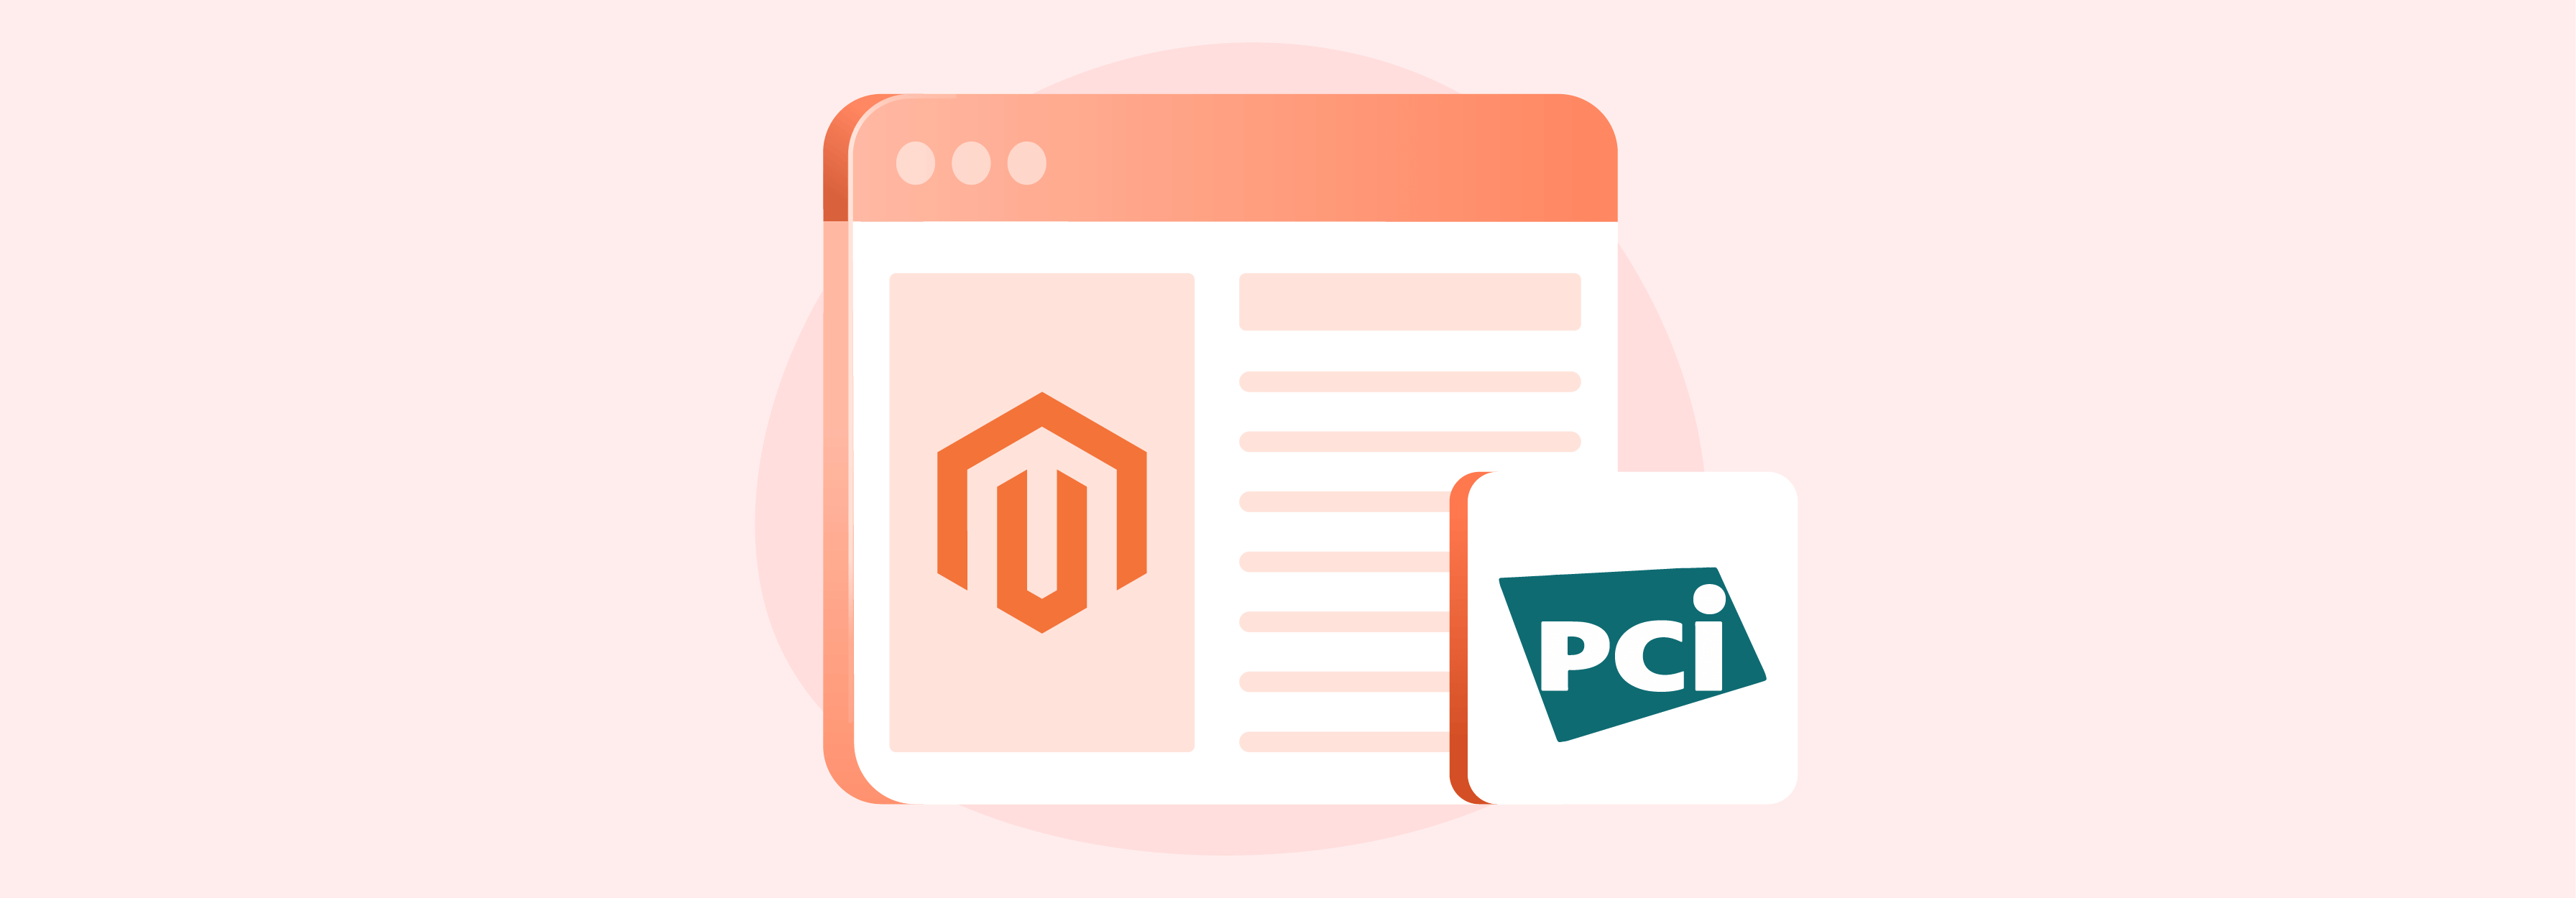 Magento PCI compliance features